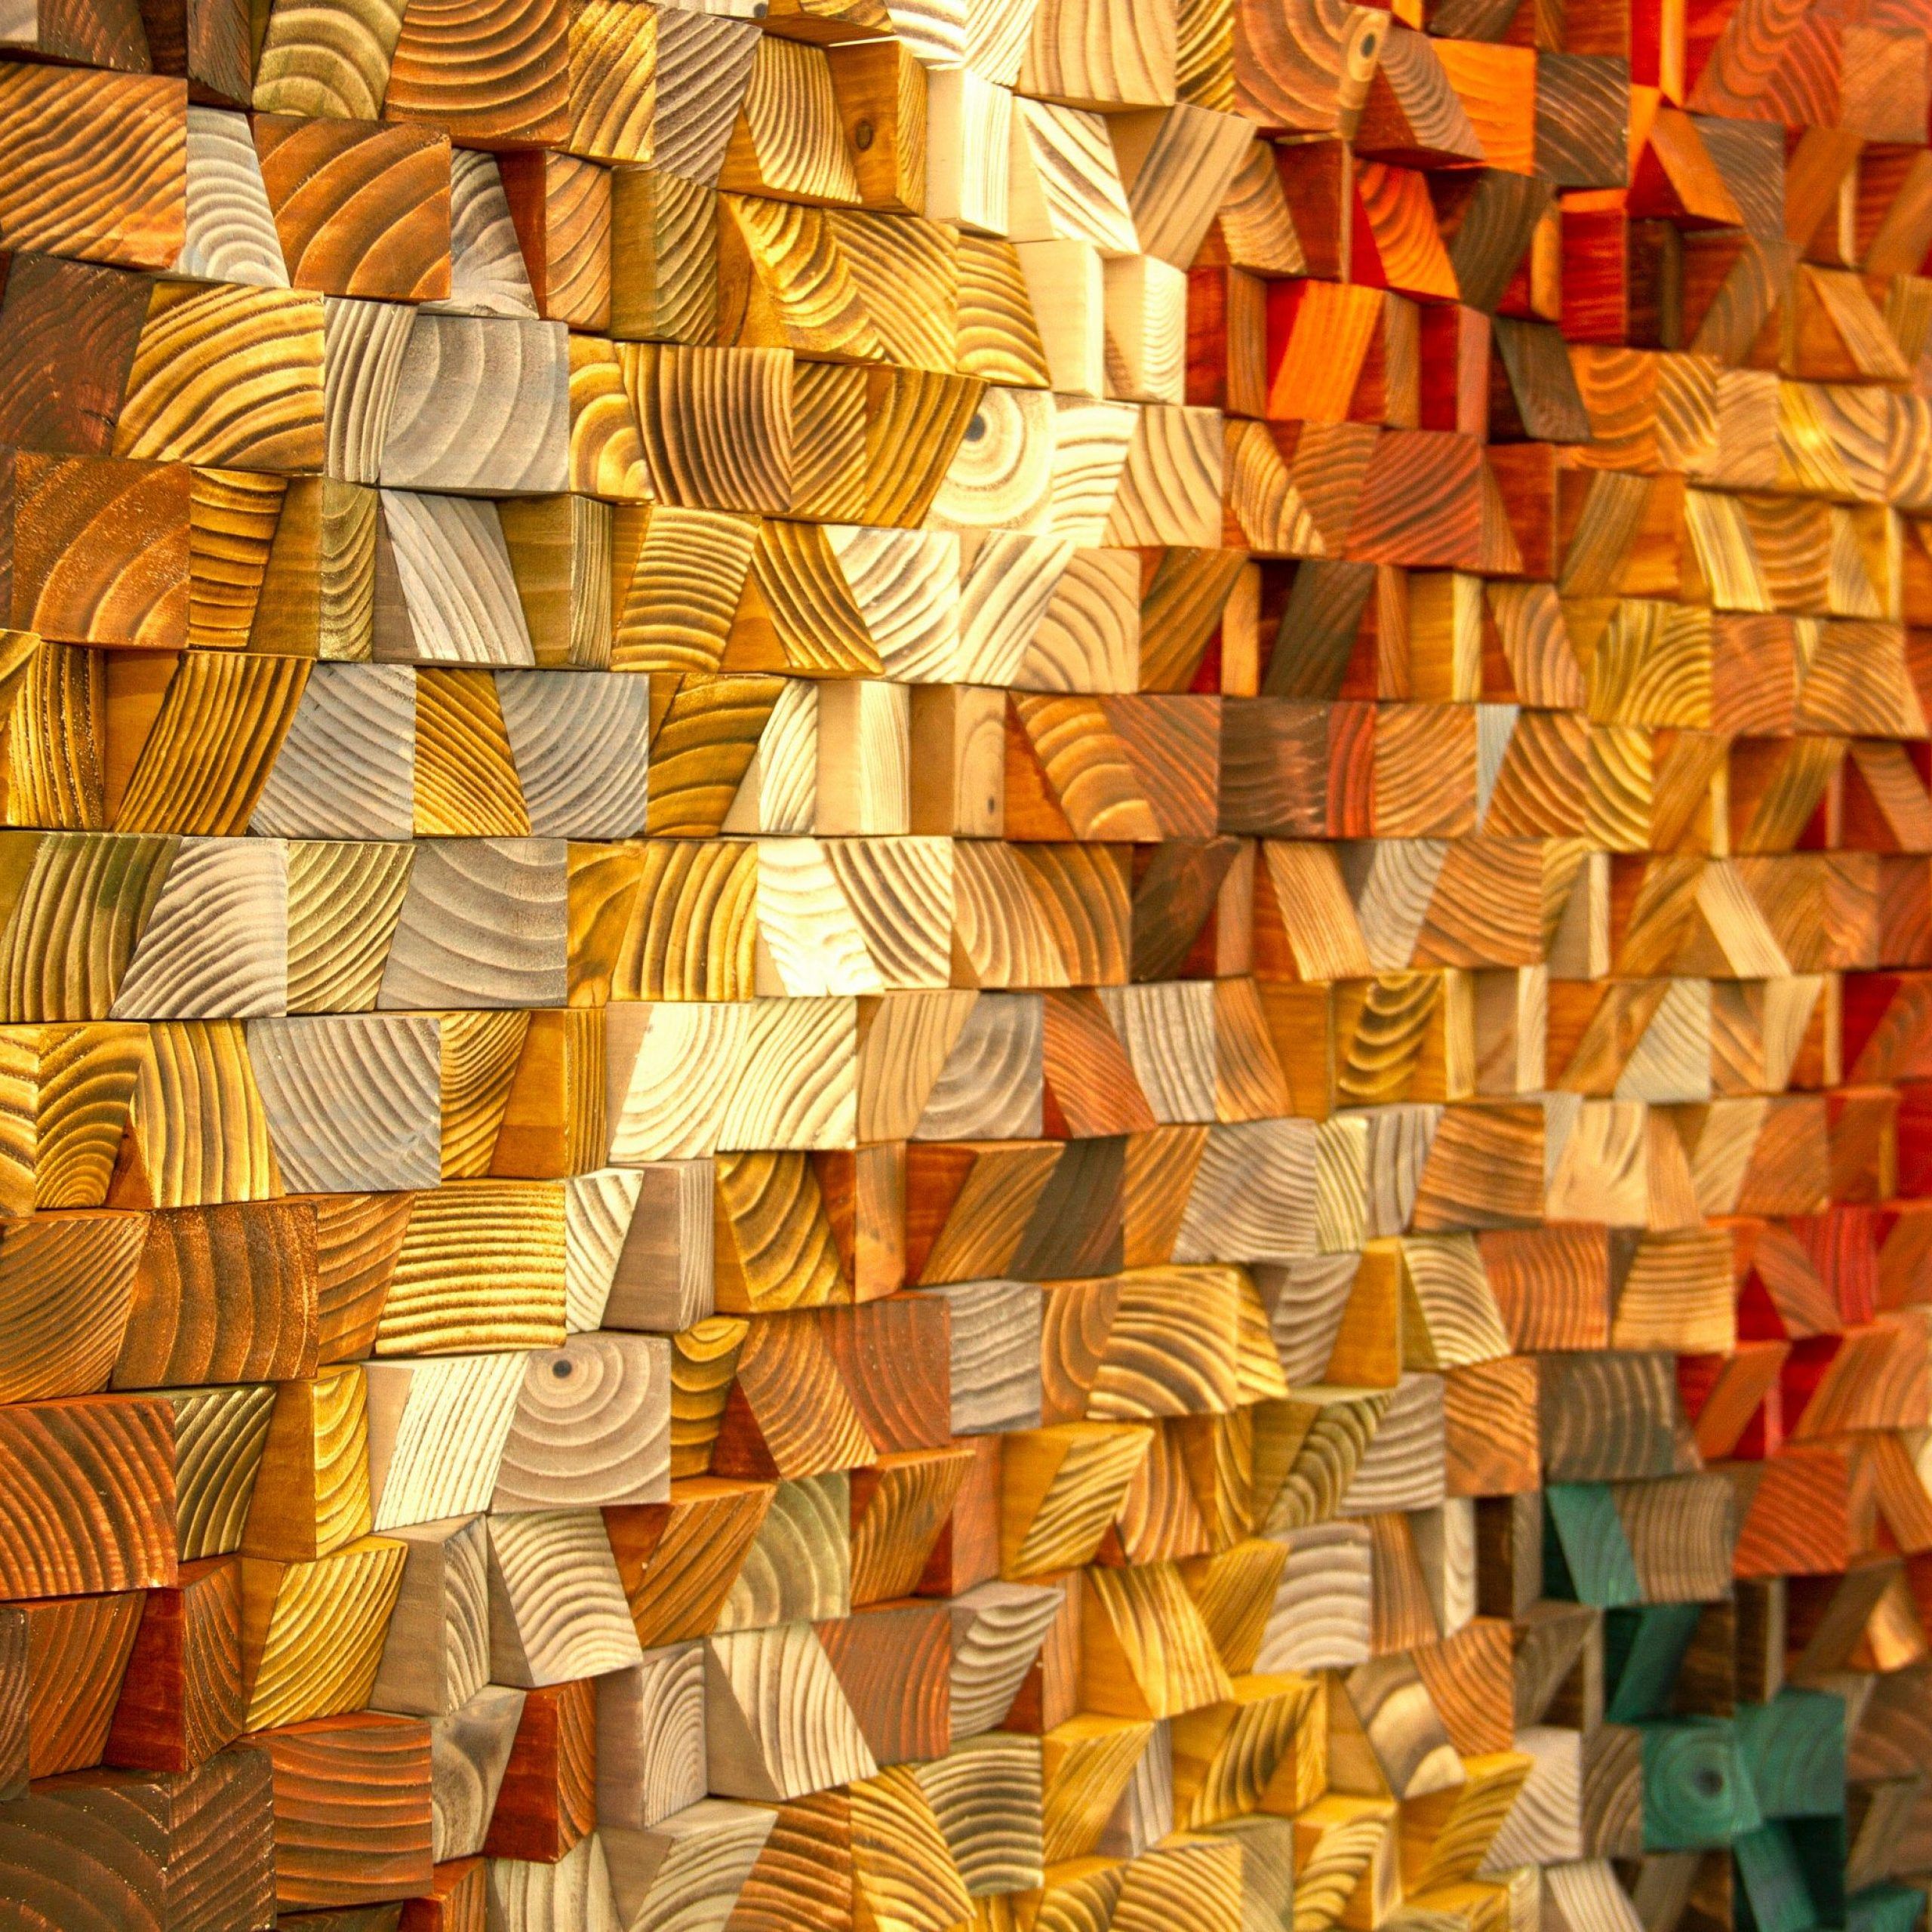 Pin On Acoustic Panel With Regard To Most Recent Abstract Wood Wall Art (View 2 of 20)